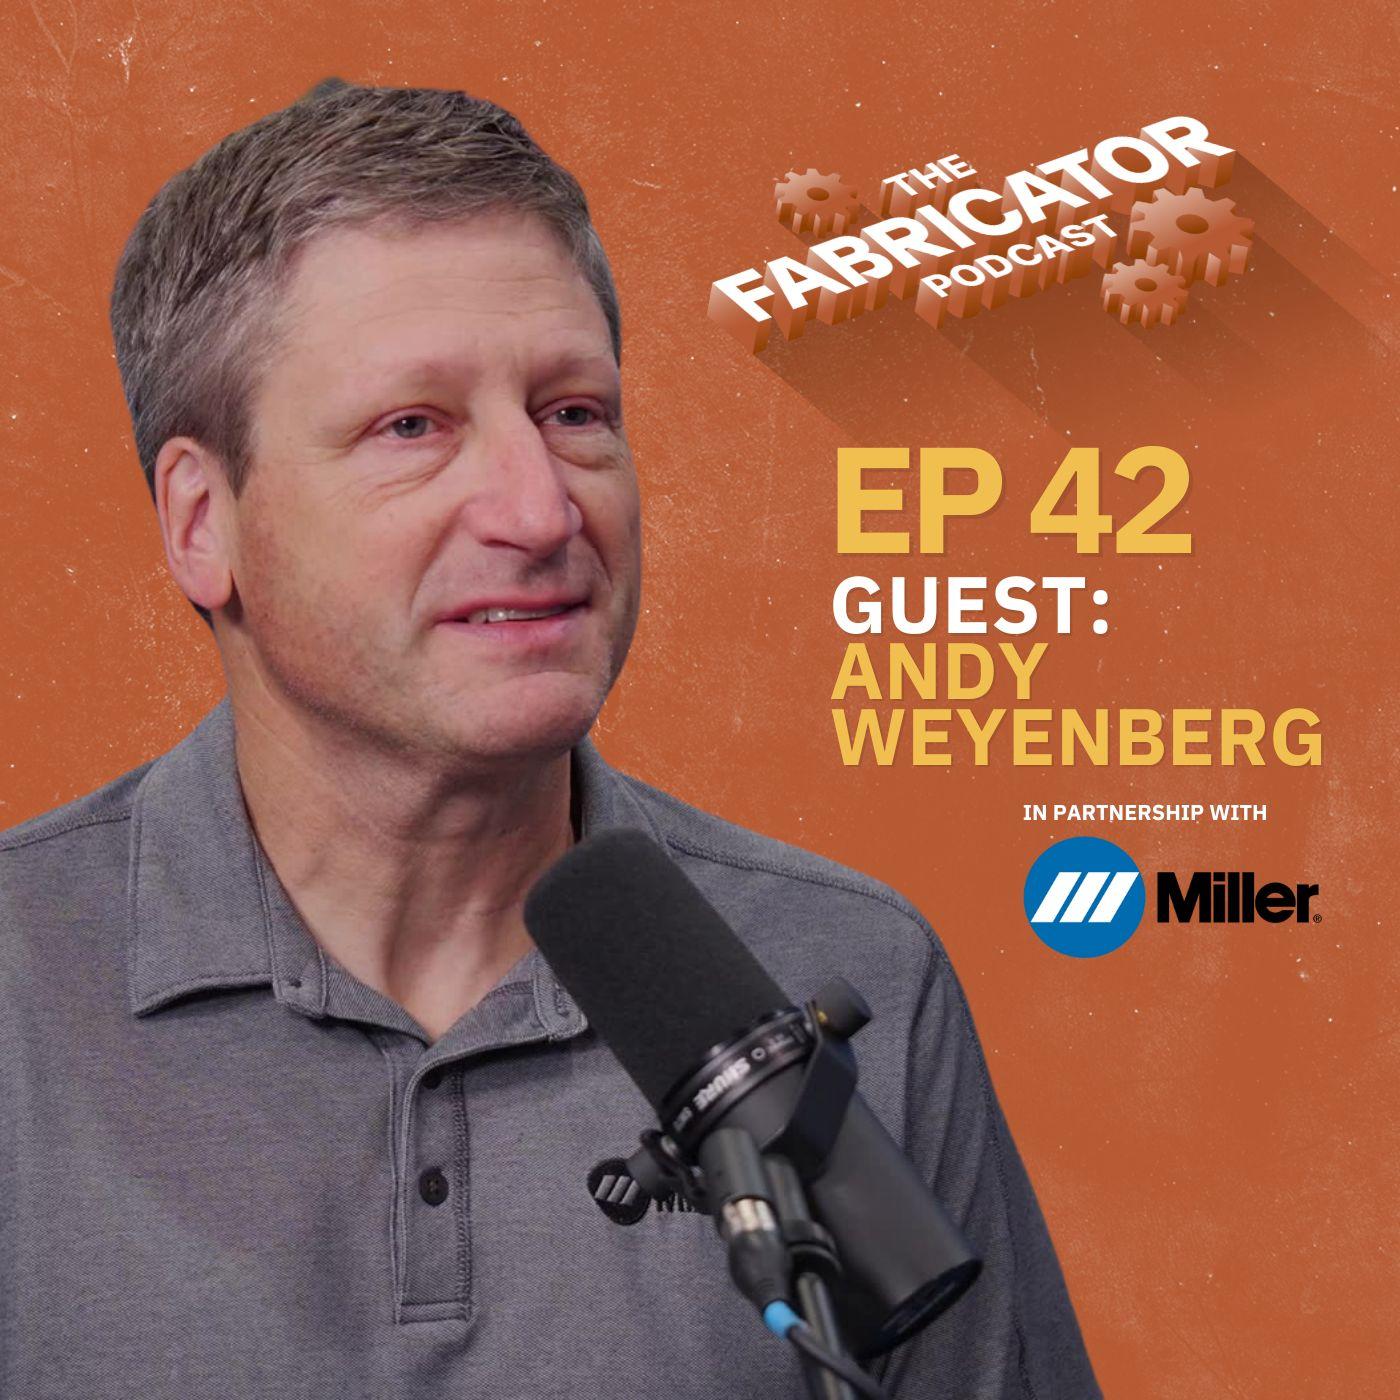 Welding in motorsports with Andy Weyenberg of Miller Electric